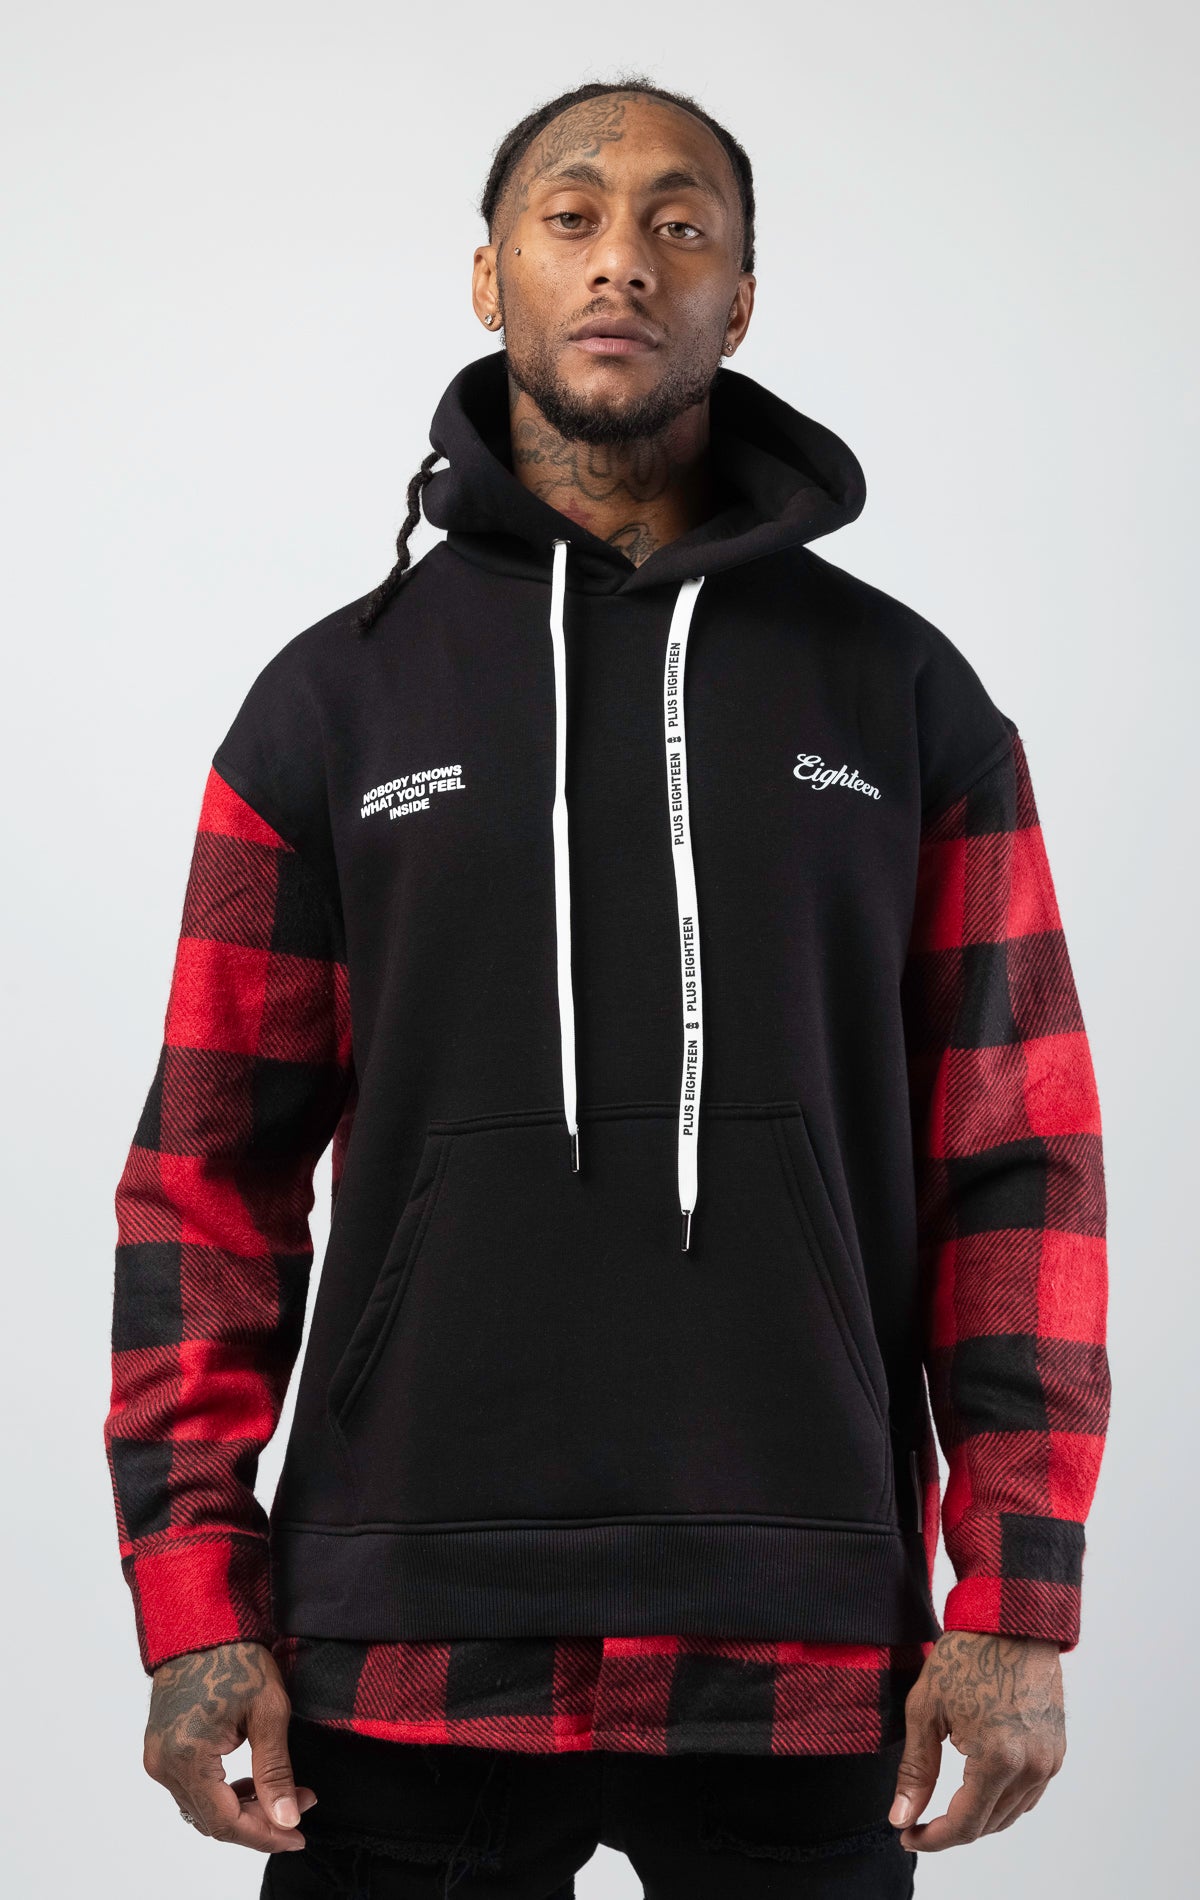 Pullover hooded sweatshirt with plaid pattern on back and sleeves.